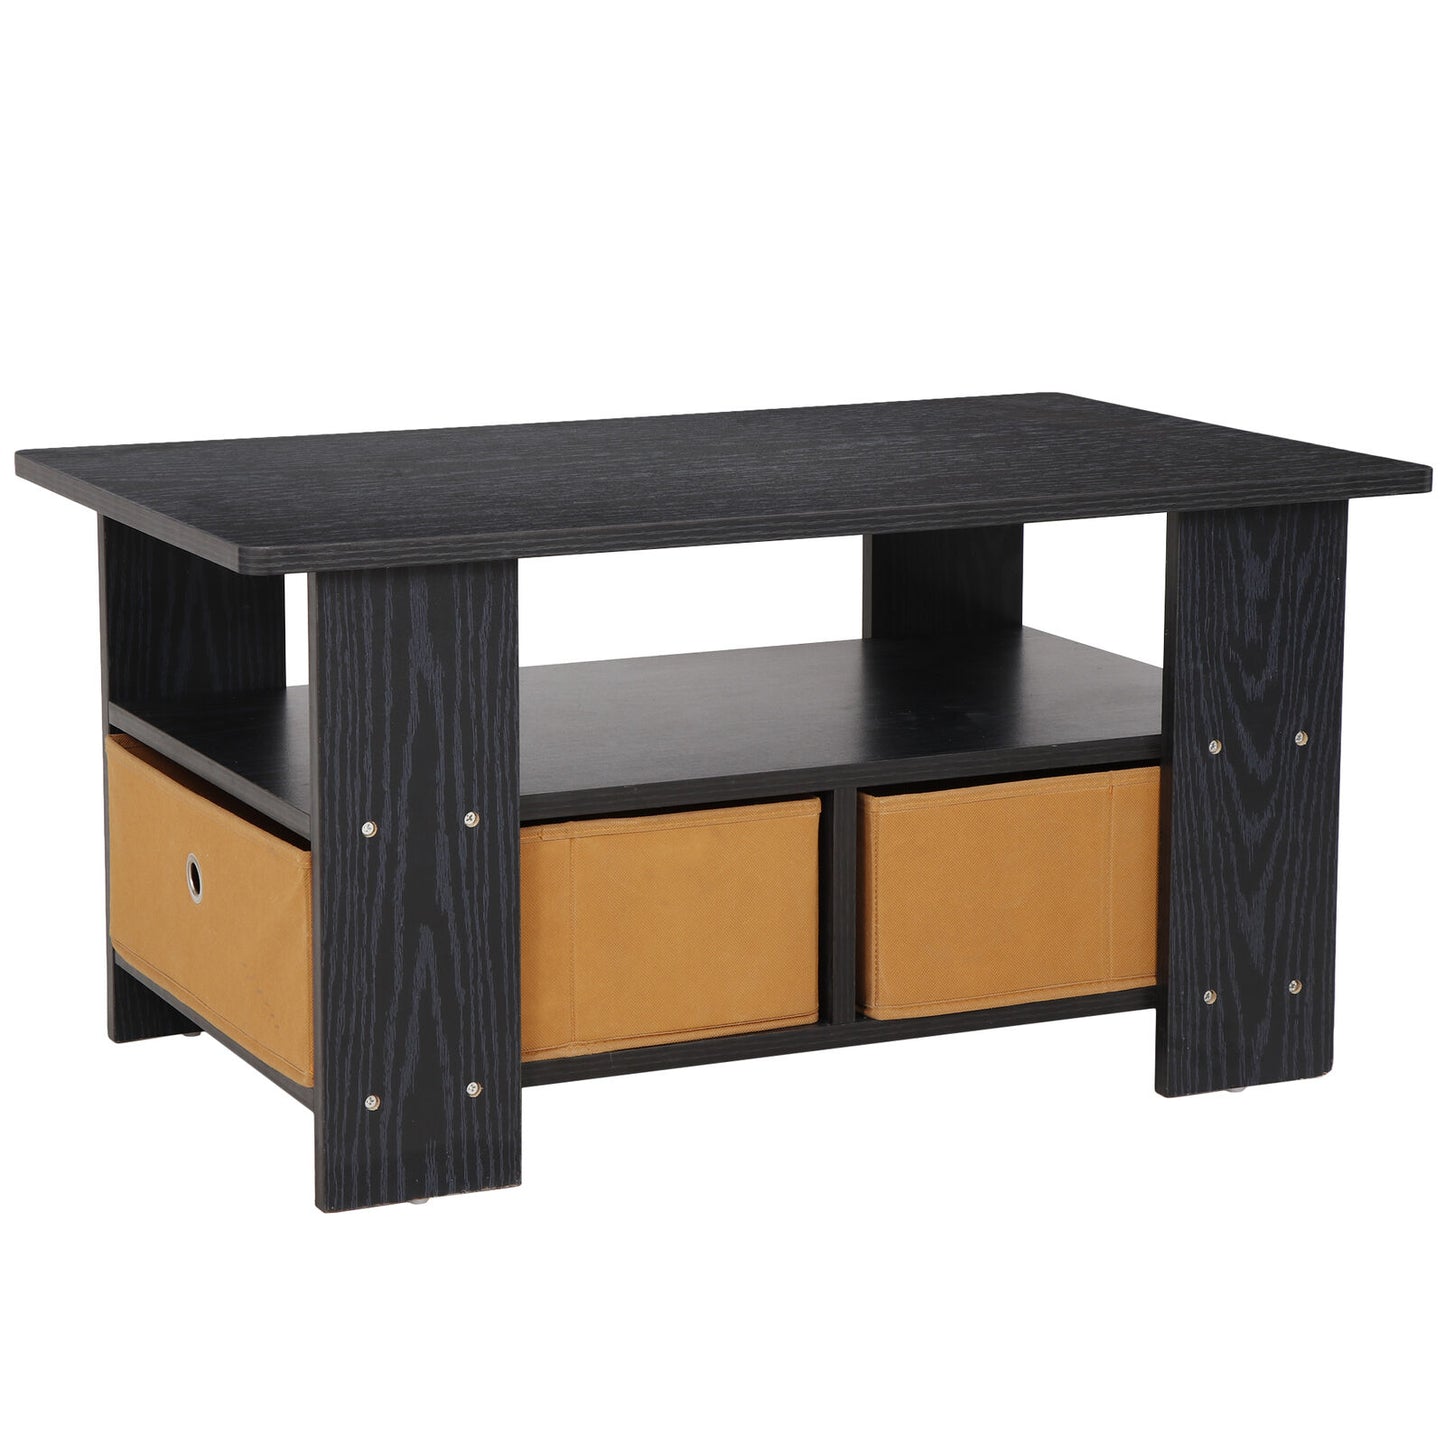 15.8"Compact Coffee Table Rectangle Open Storage with 2 Non-woven Drawers